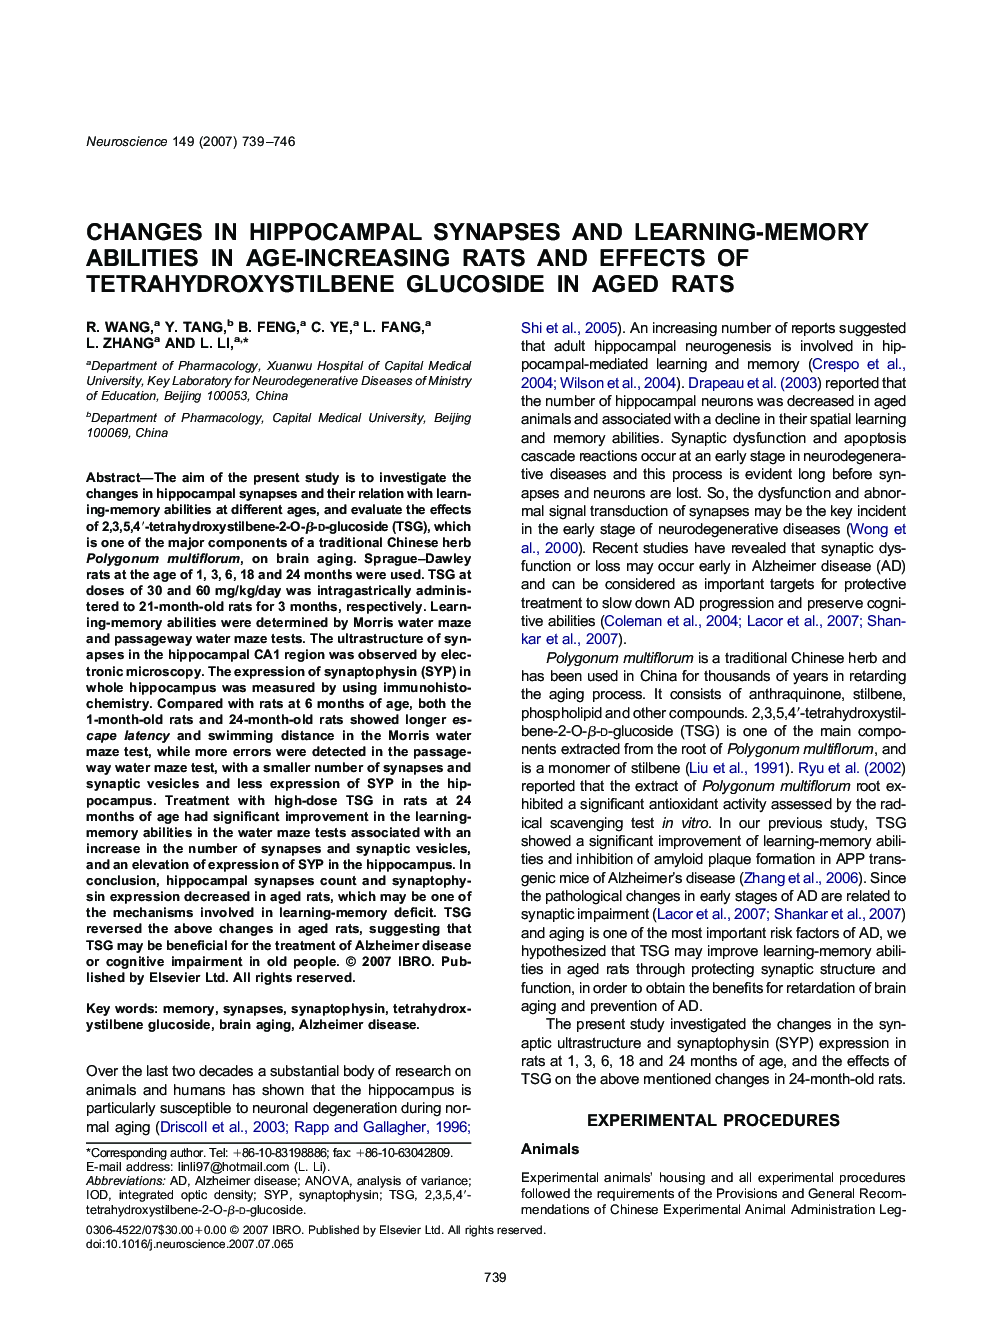 Changes in hippocampal synapses and learning-memory abilities in age-increasing rats and effects of tetrahydroxystilbene glucoside in aged rats